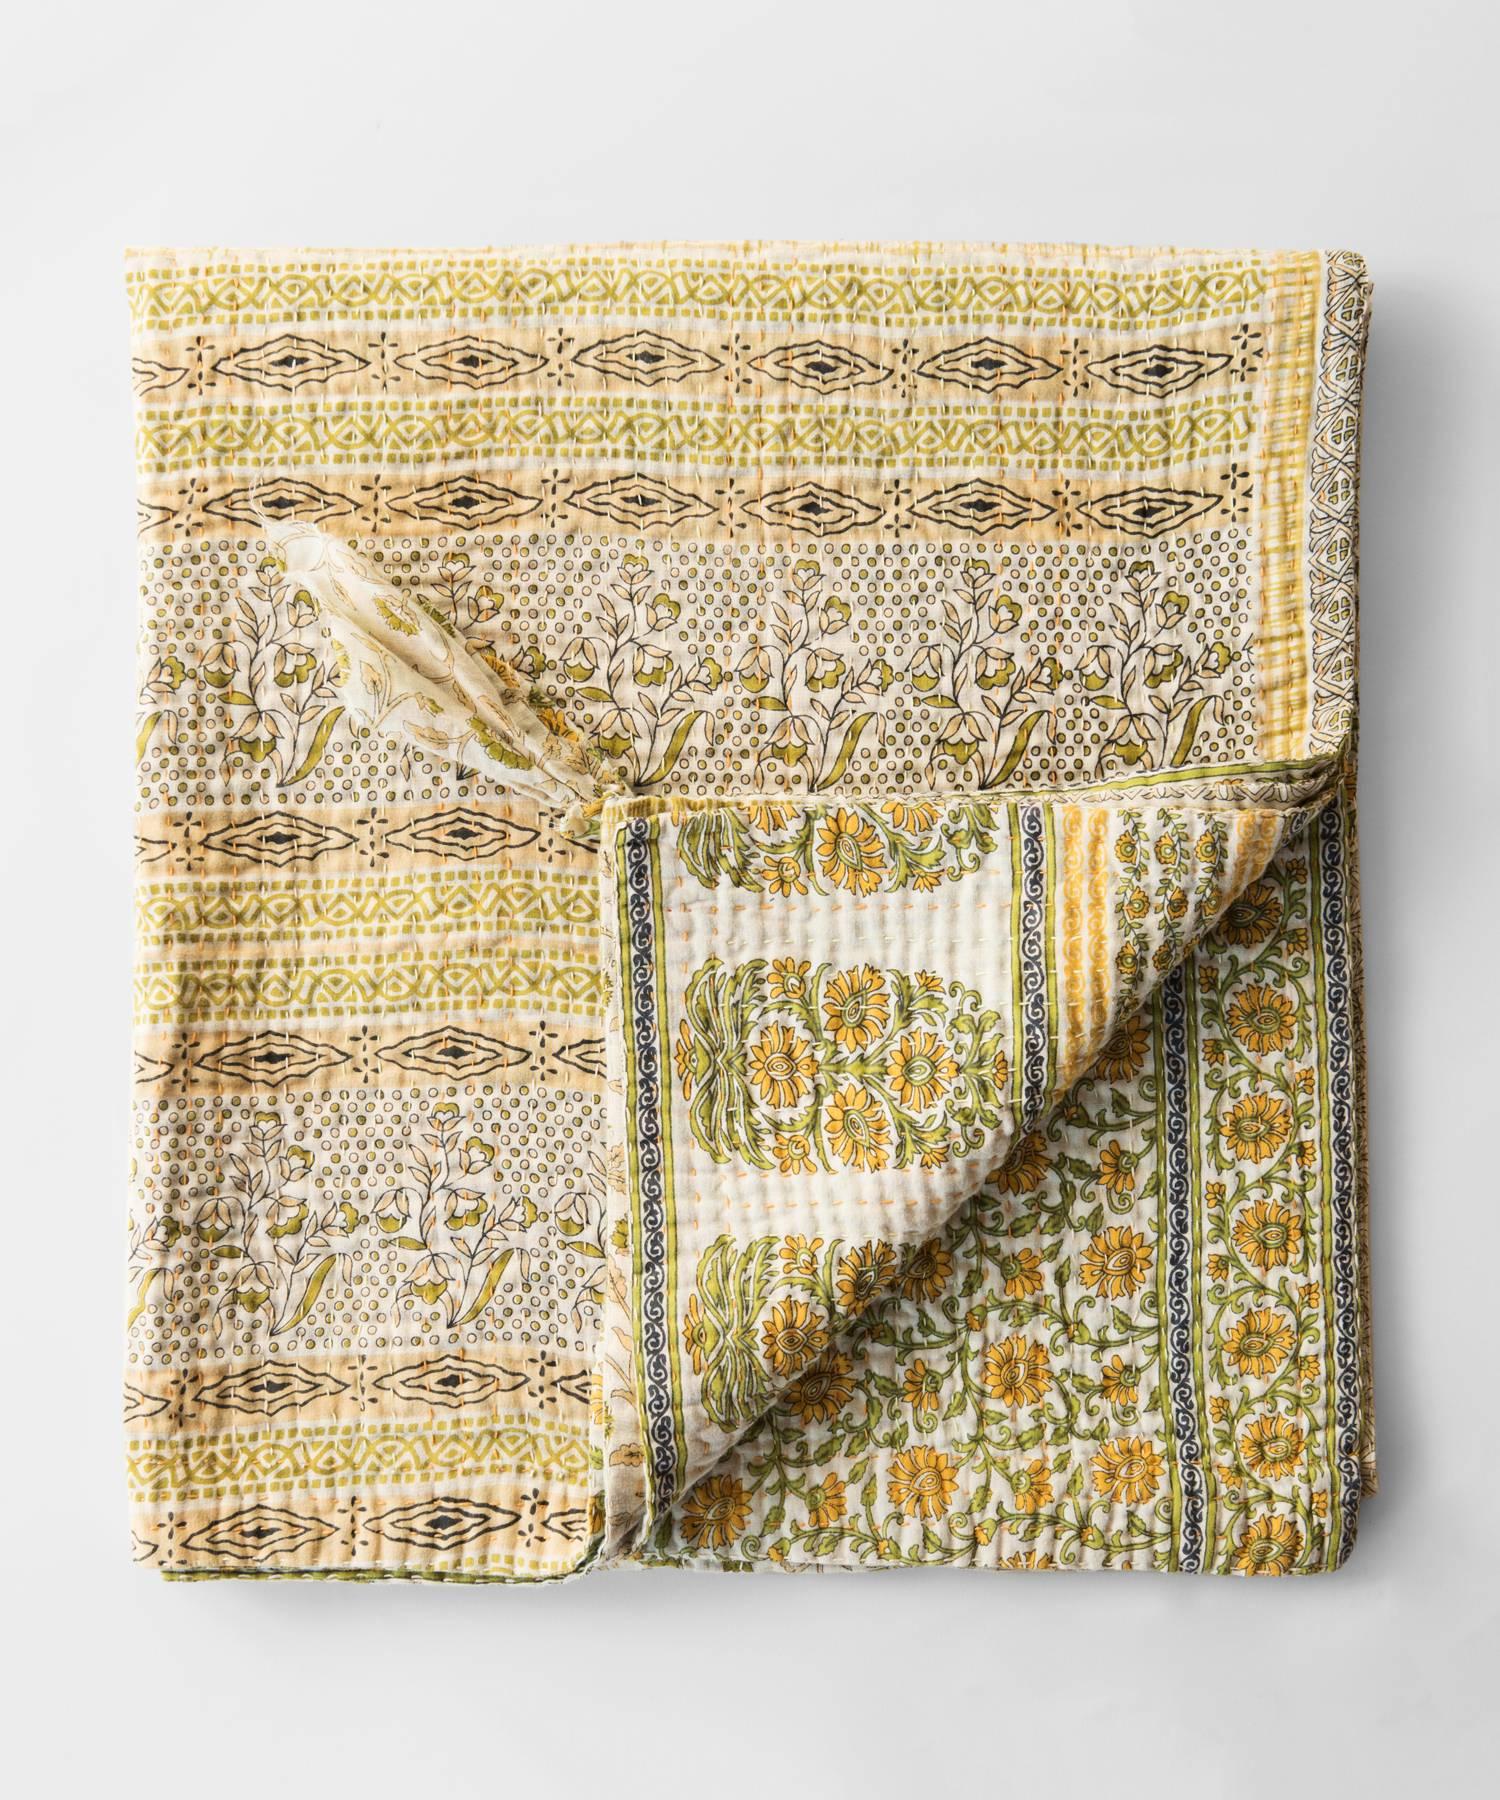 Jeanette Farrier Indian quilt

Kantha quilt made from a patchwork of layers of cotton sari joined by a simple running stitch that produces a rippled effect. Each piece is unique.